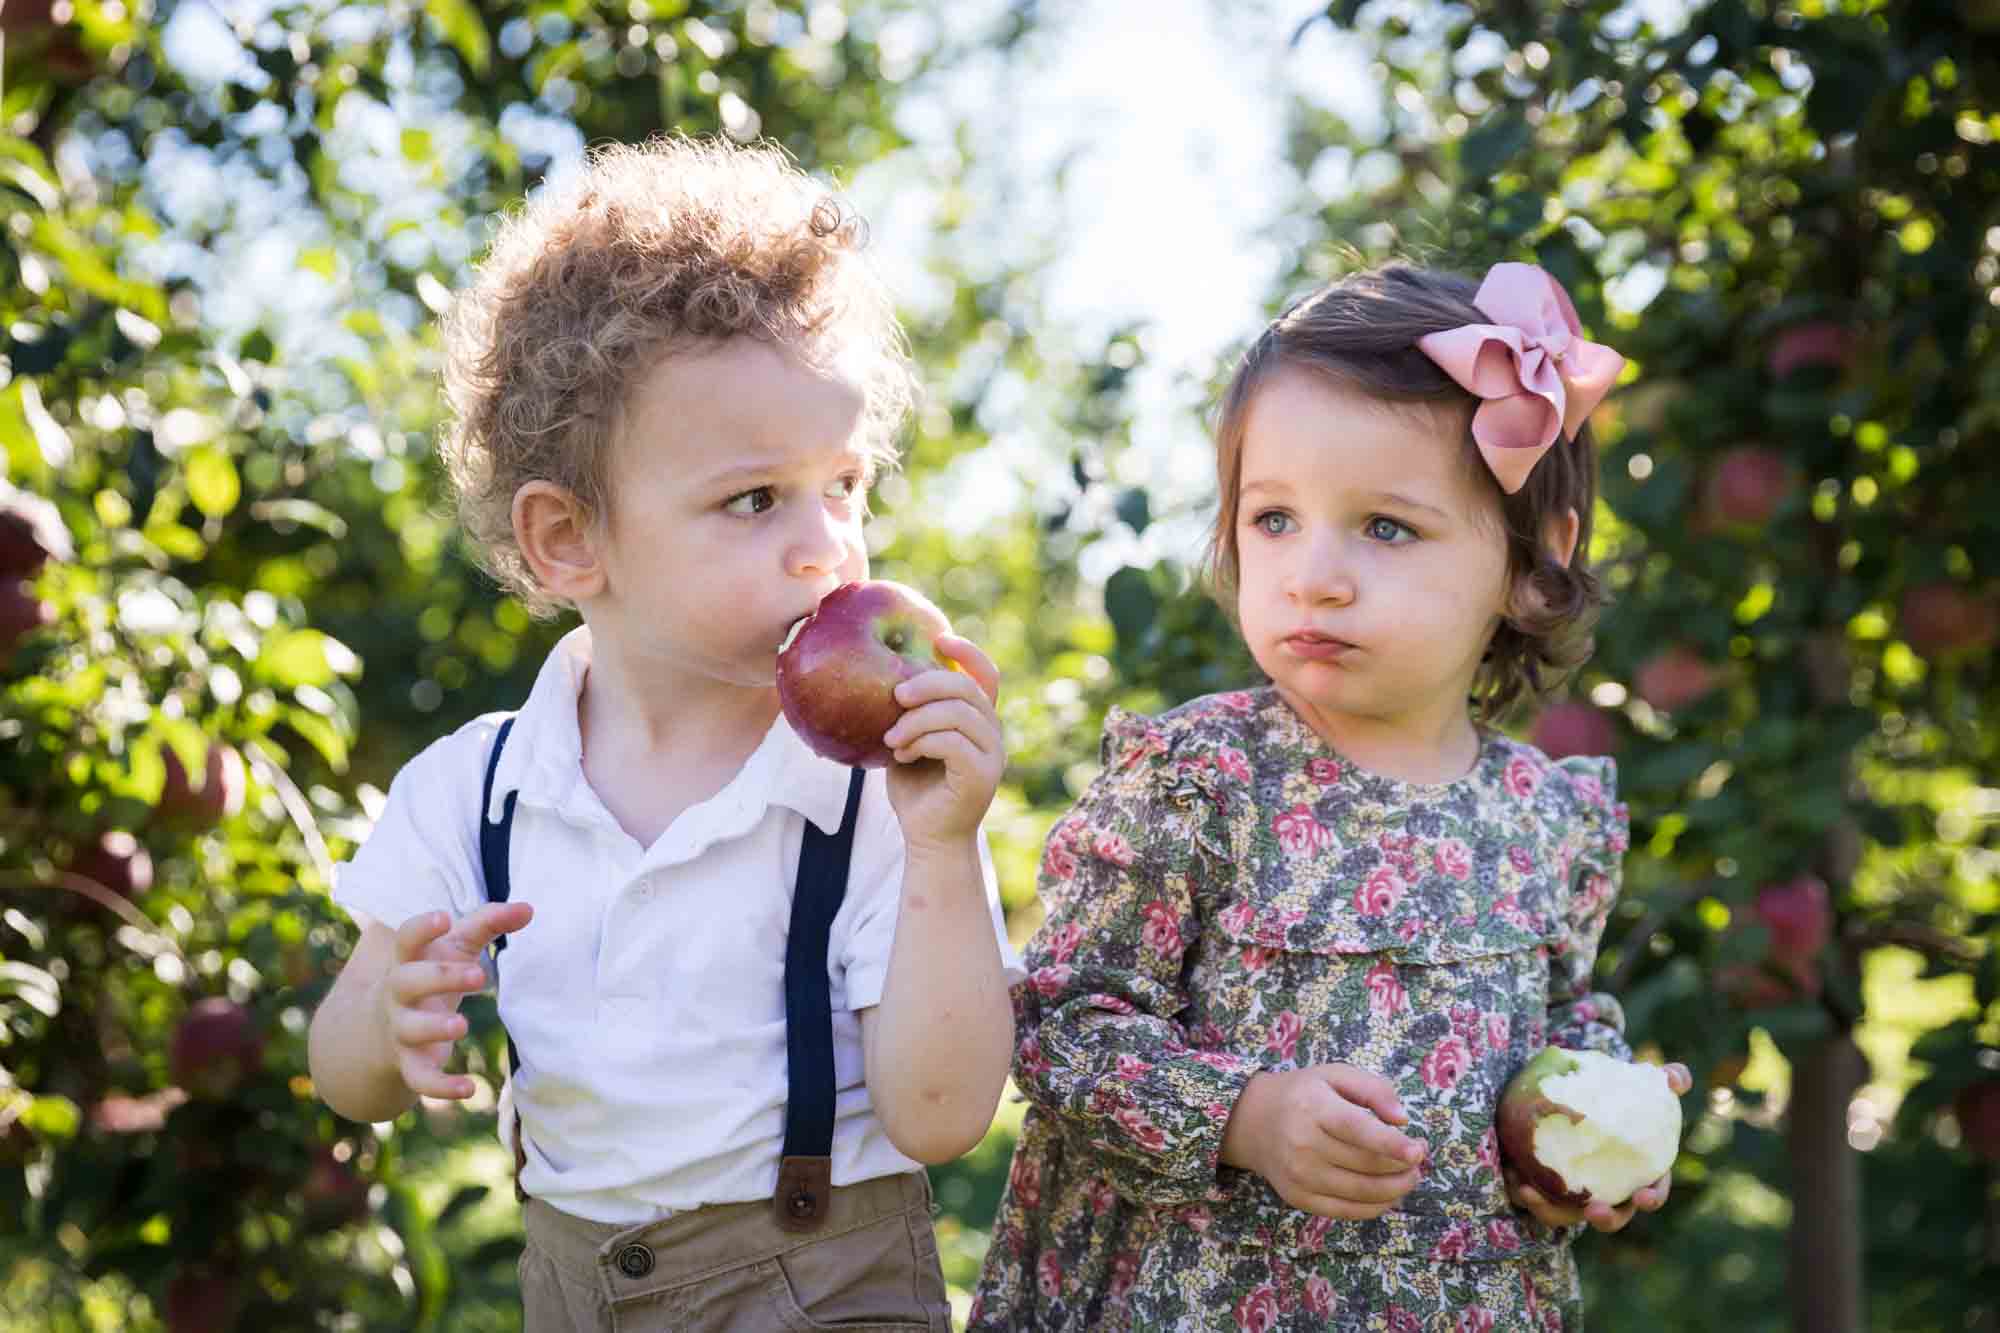 Two toddlers eating apples in an orchard for an article on tips for apple picking family photos